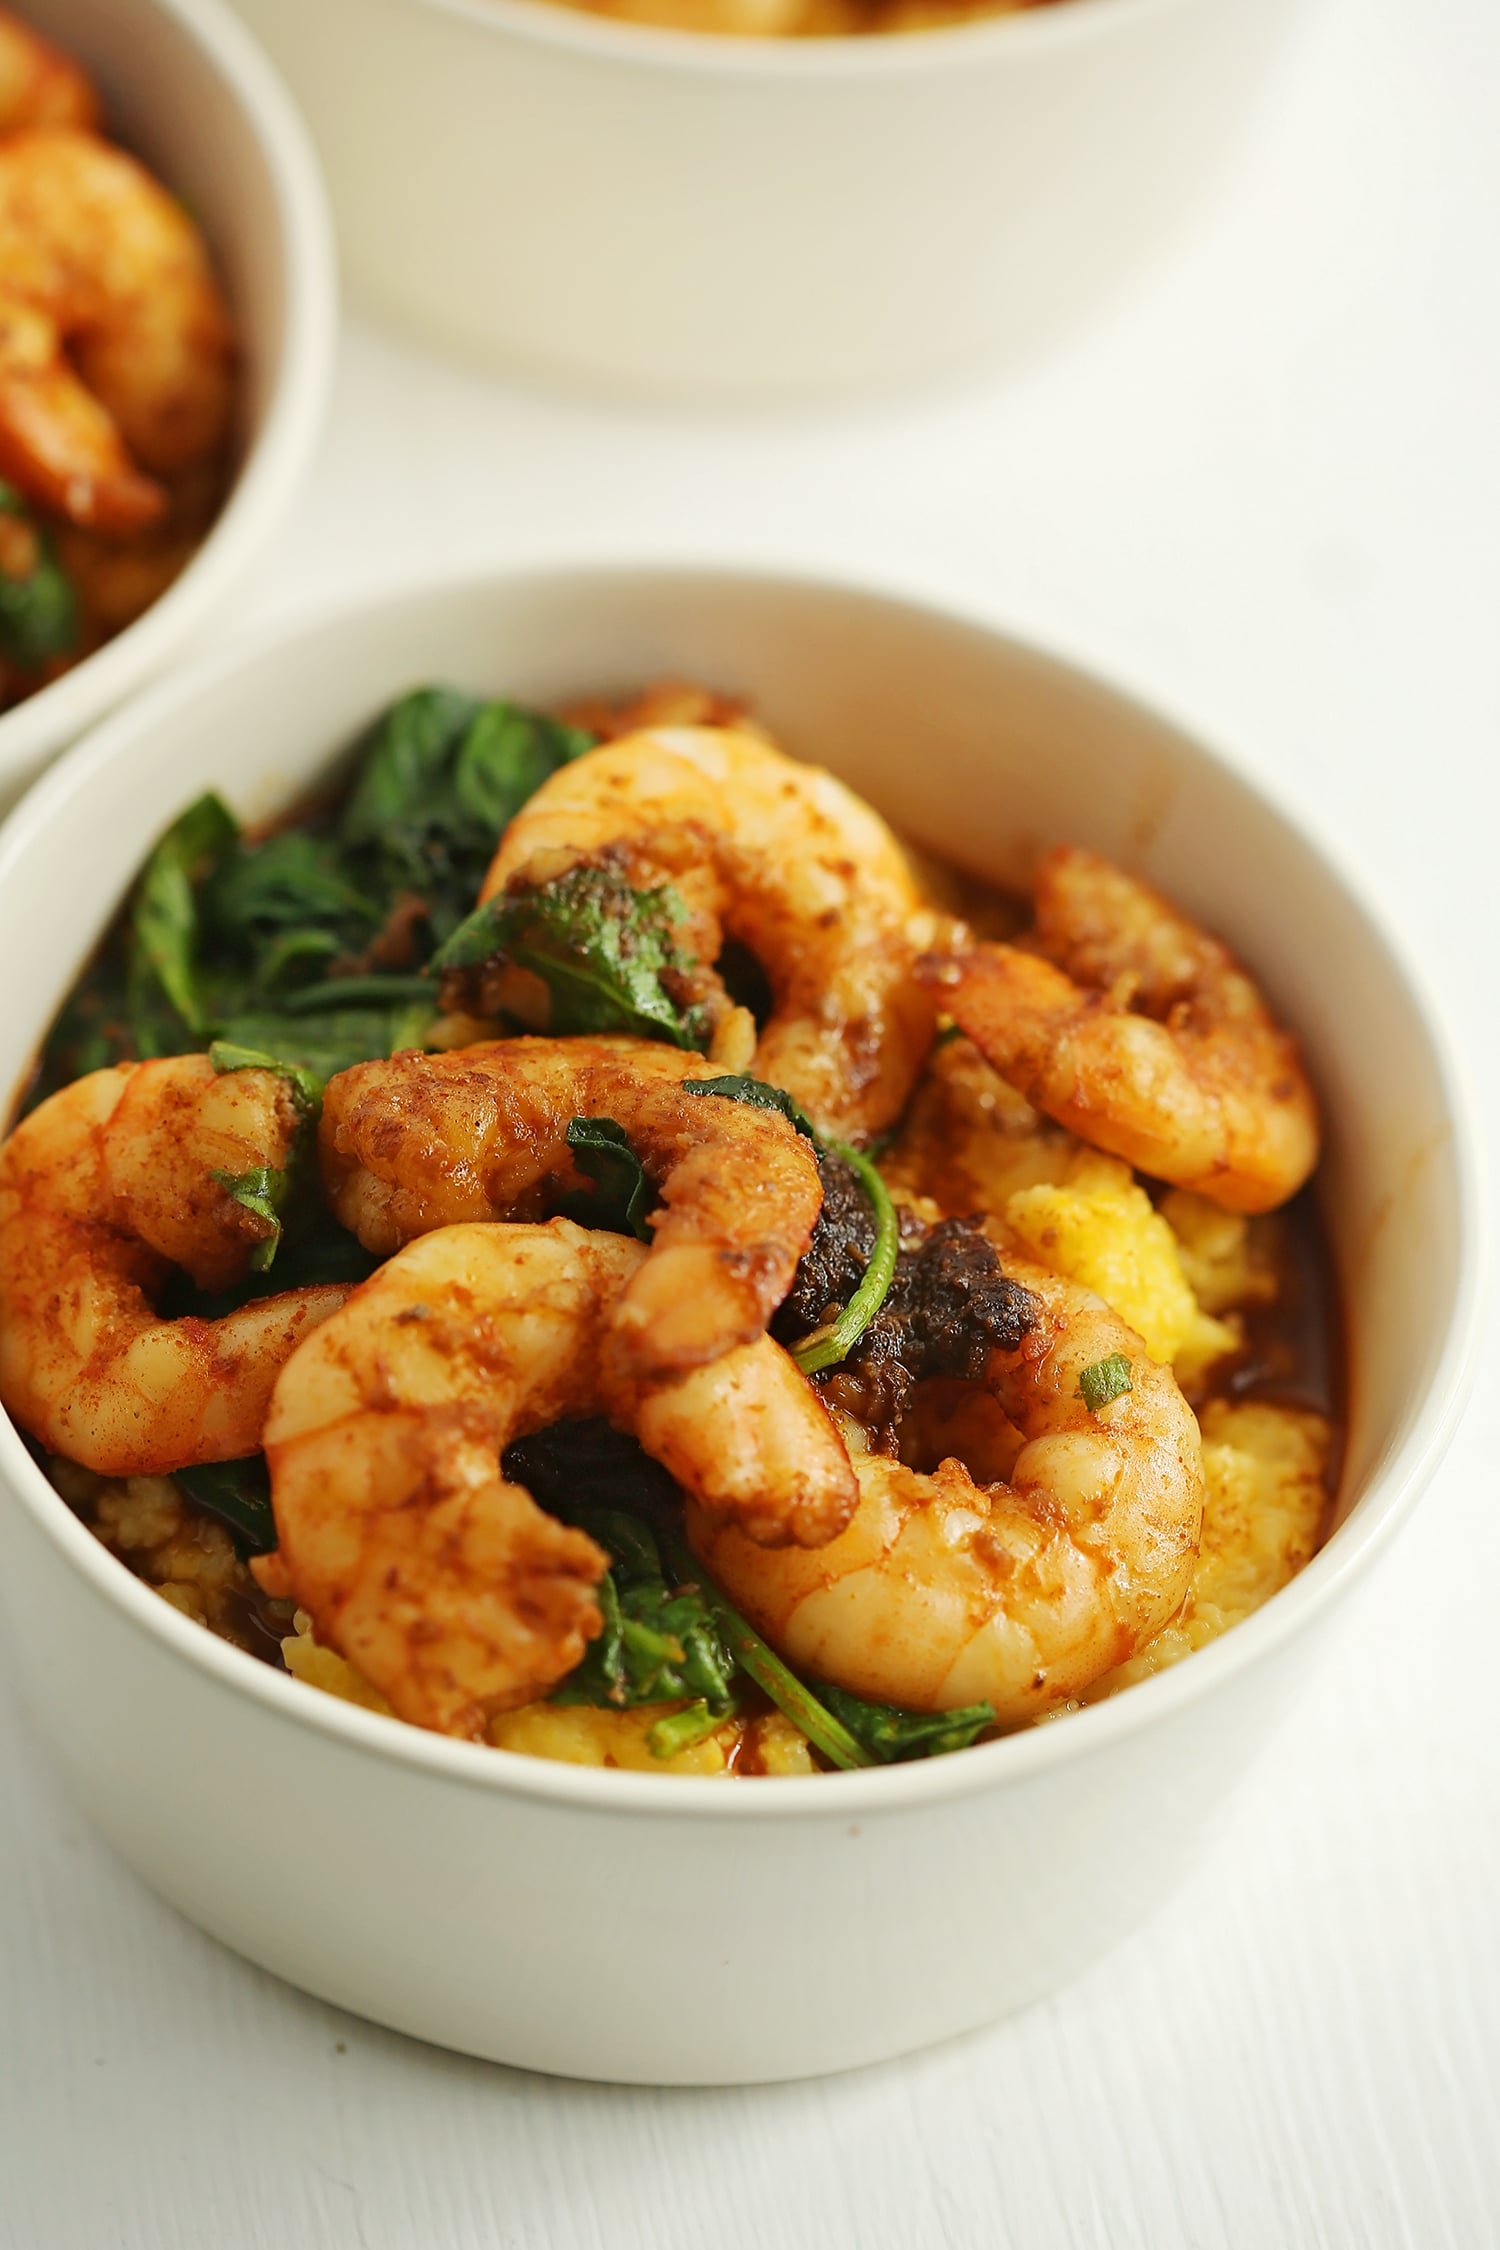 shrimps, grits, and spinach in a white bowl